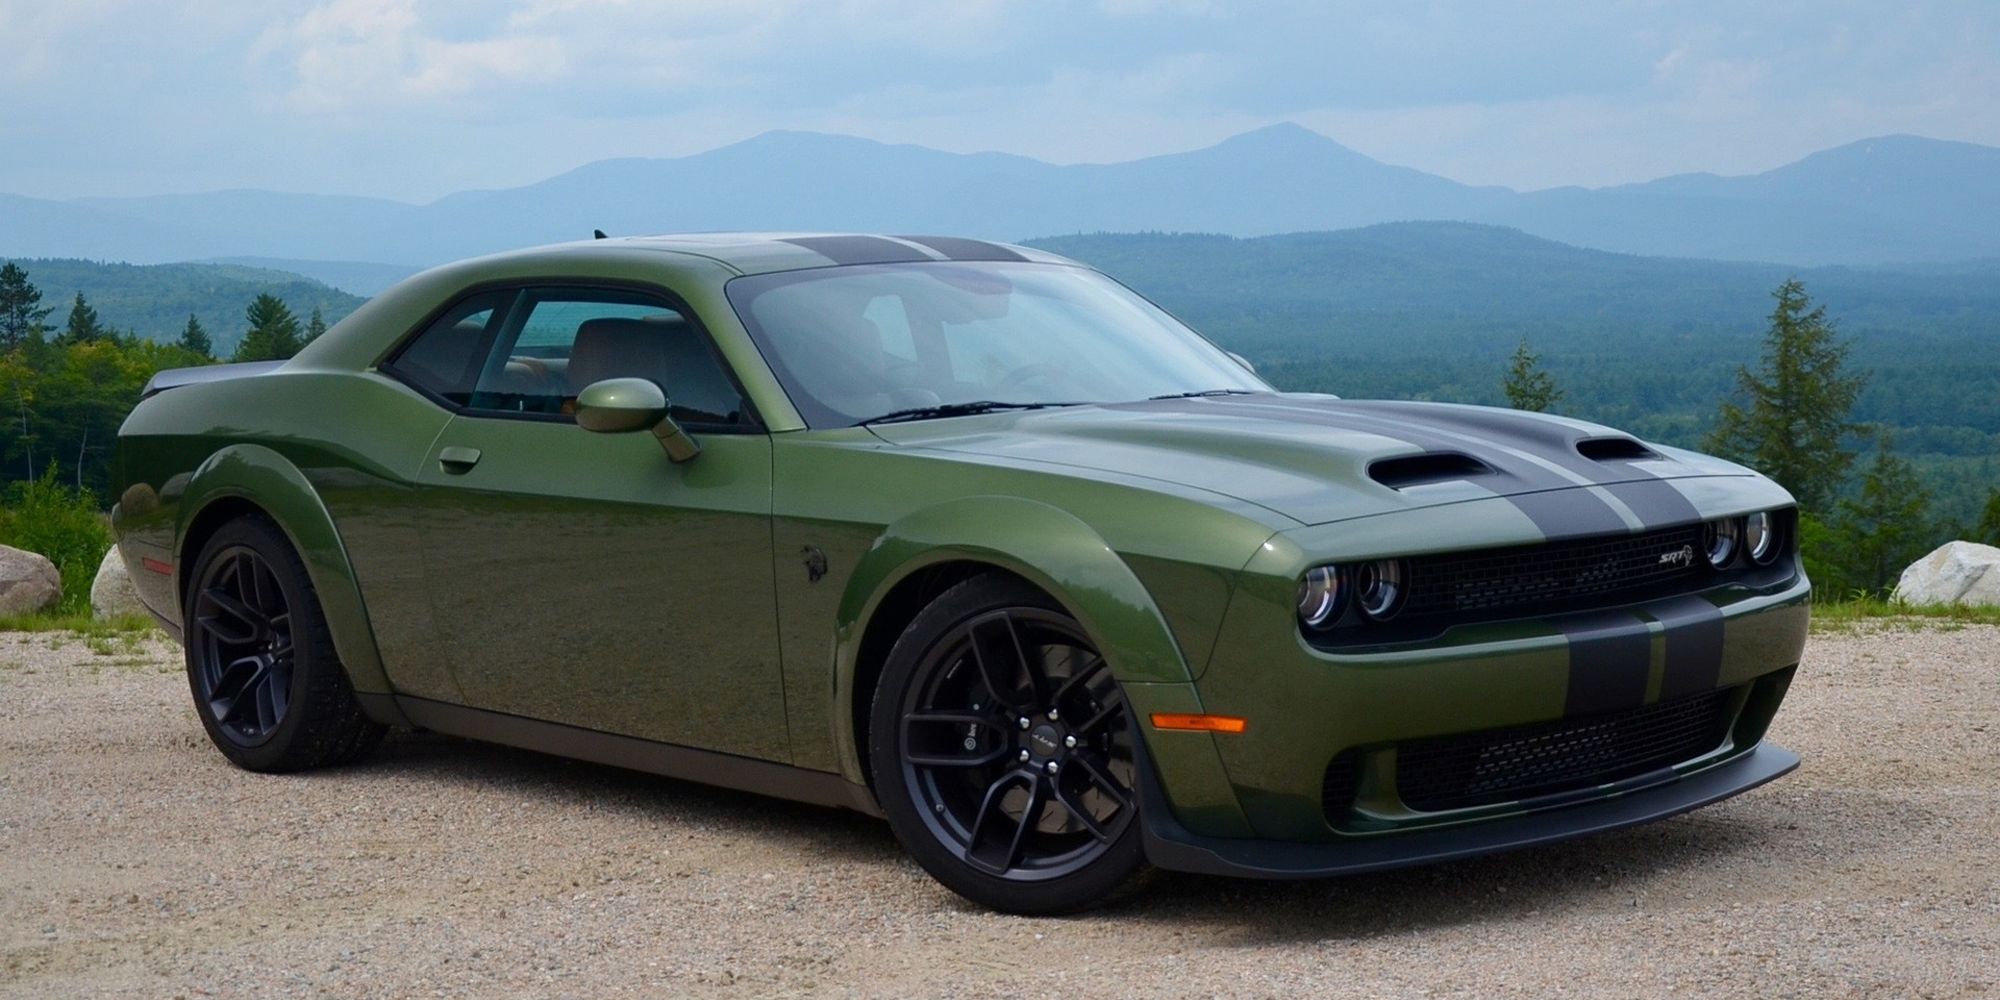 A green Hellcat with black stripes